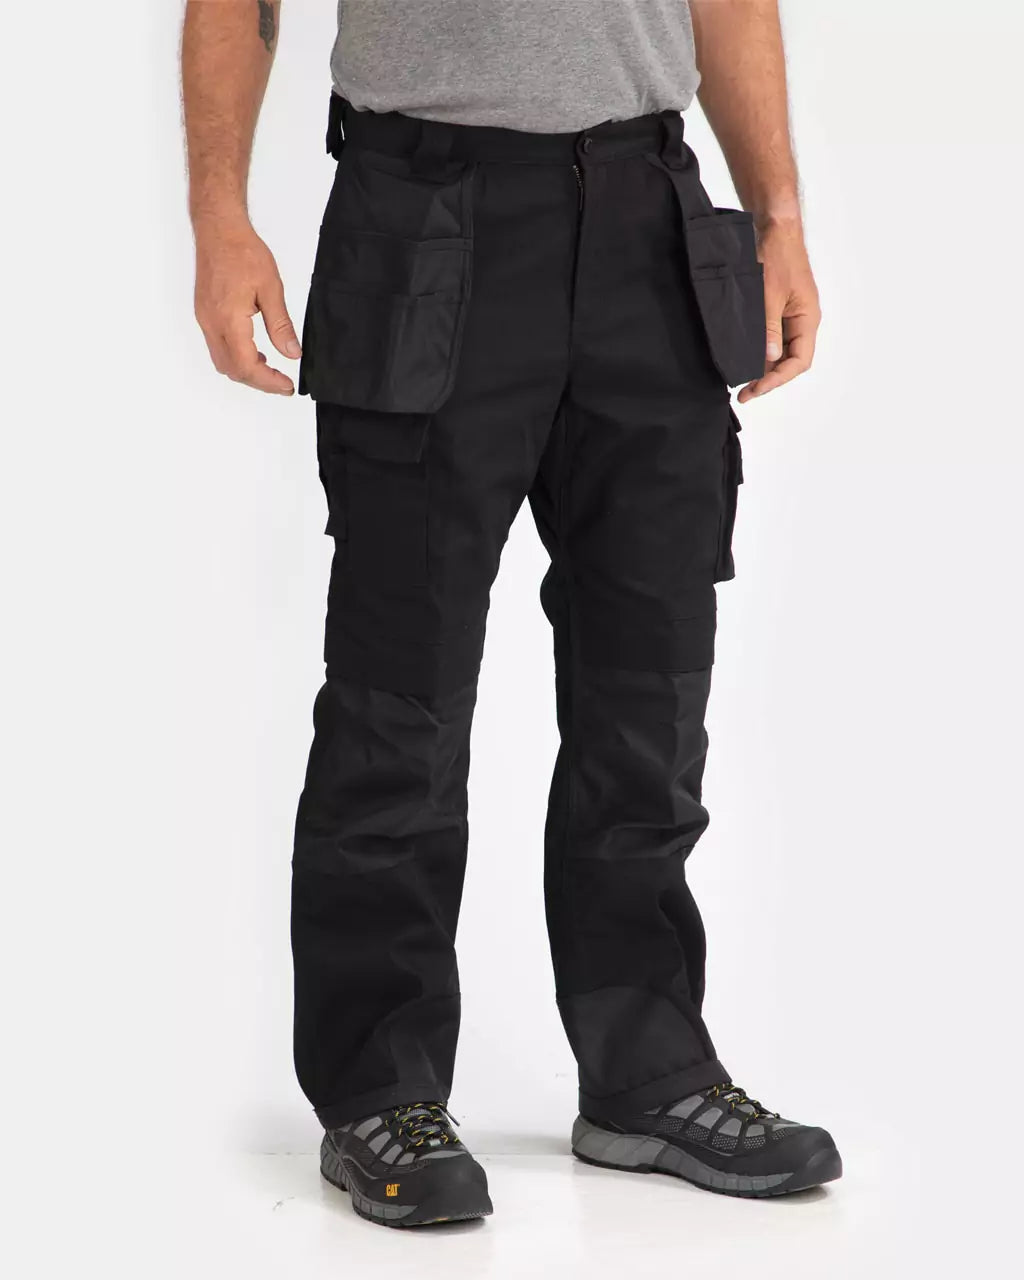 Stylish and Practical Cargo Pants Outfit